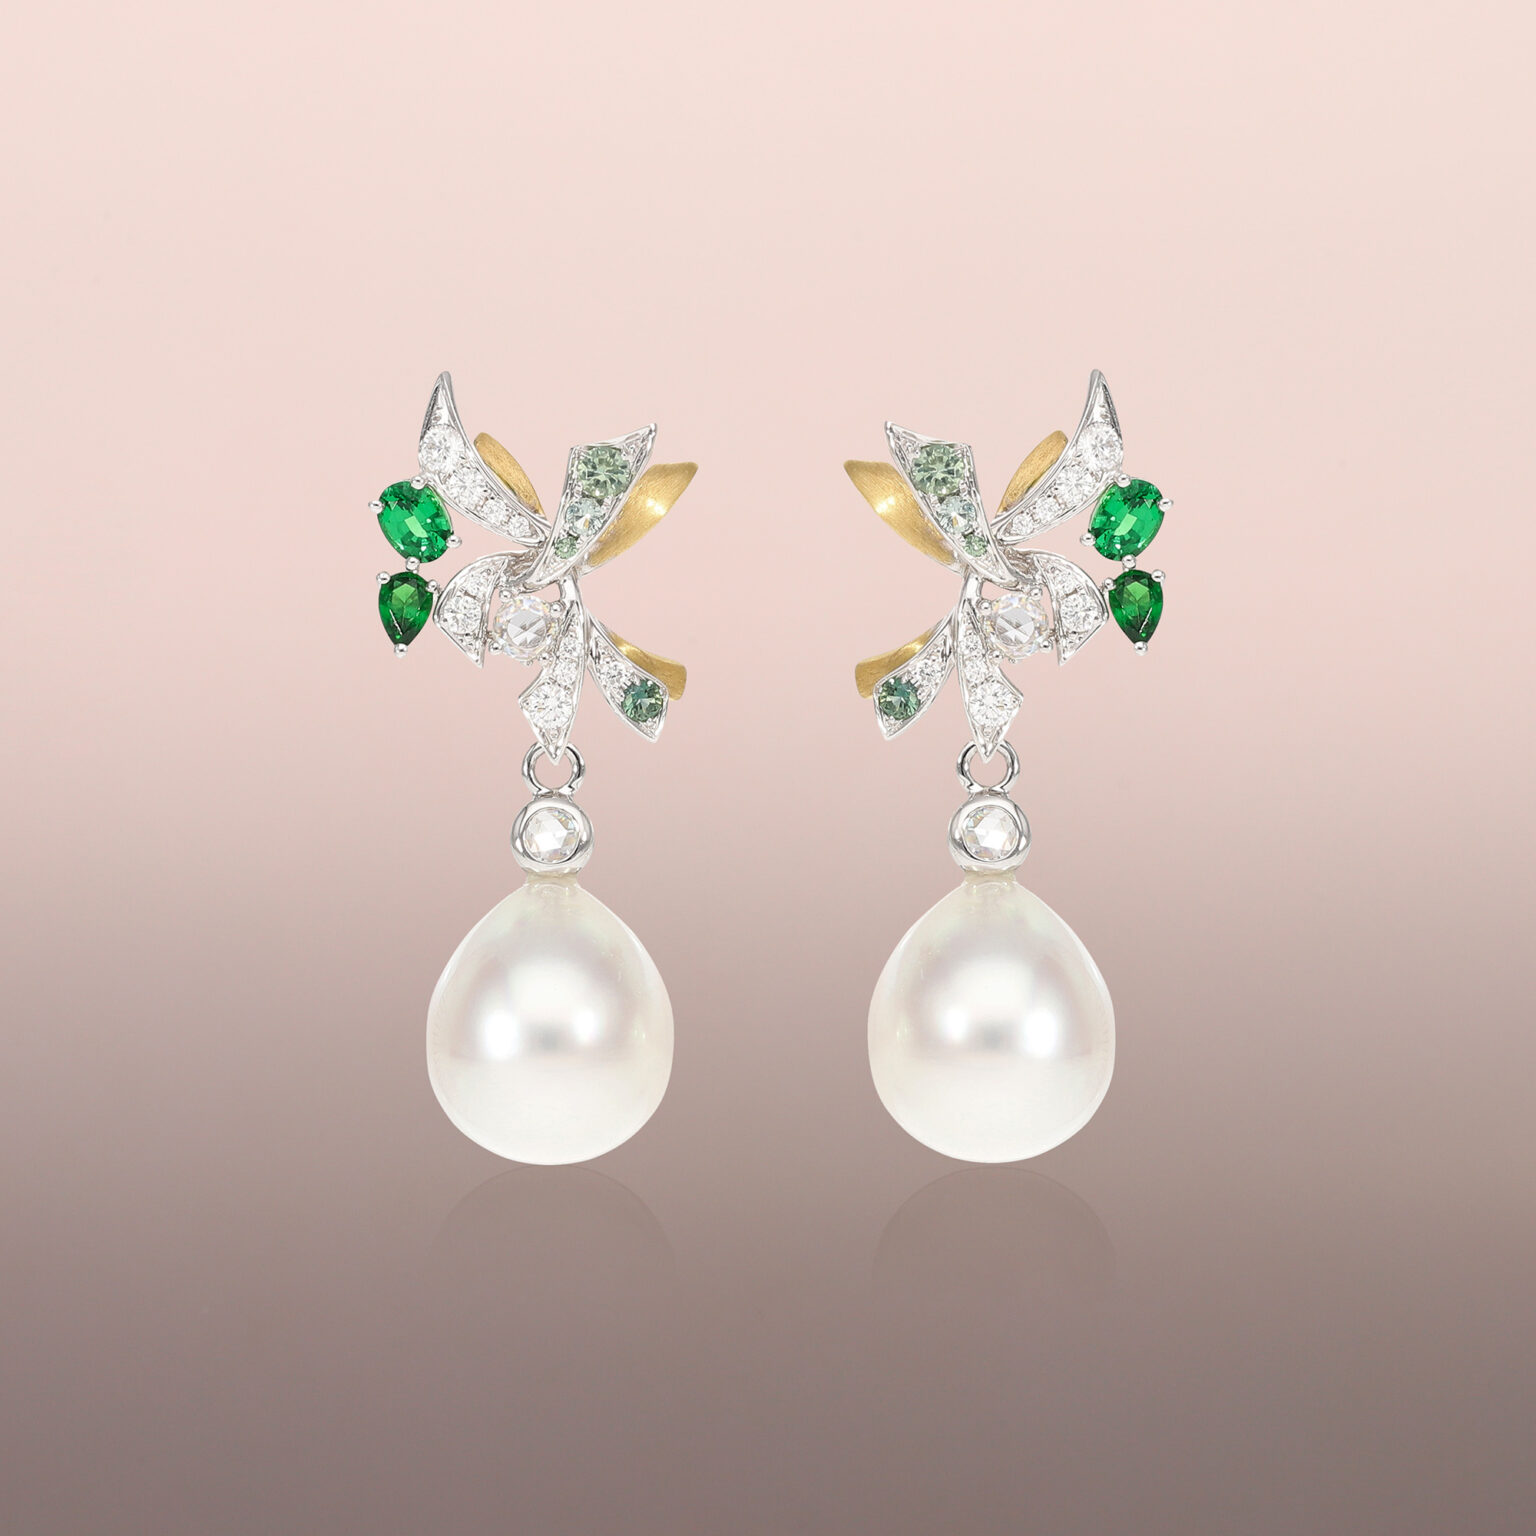 Pearl drop earrings with rose-cut round diamonds